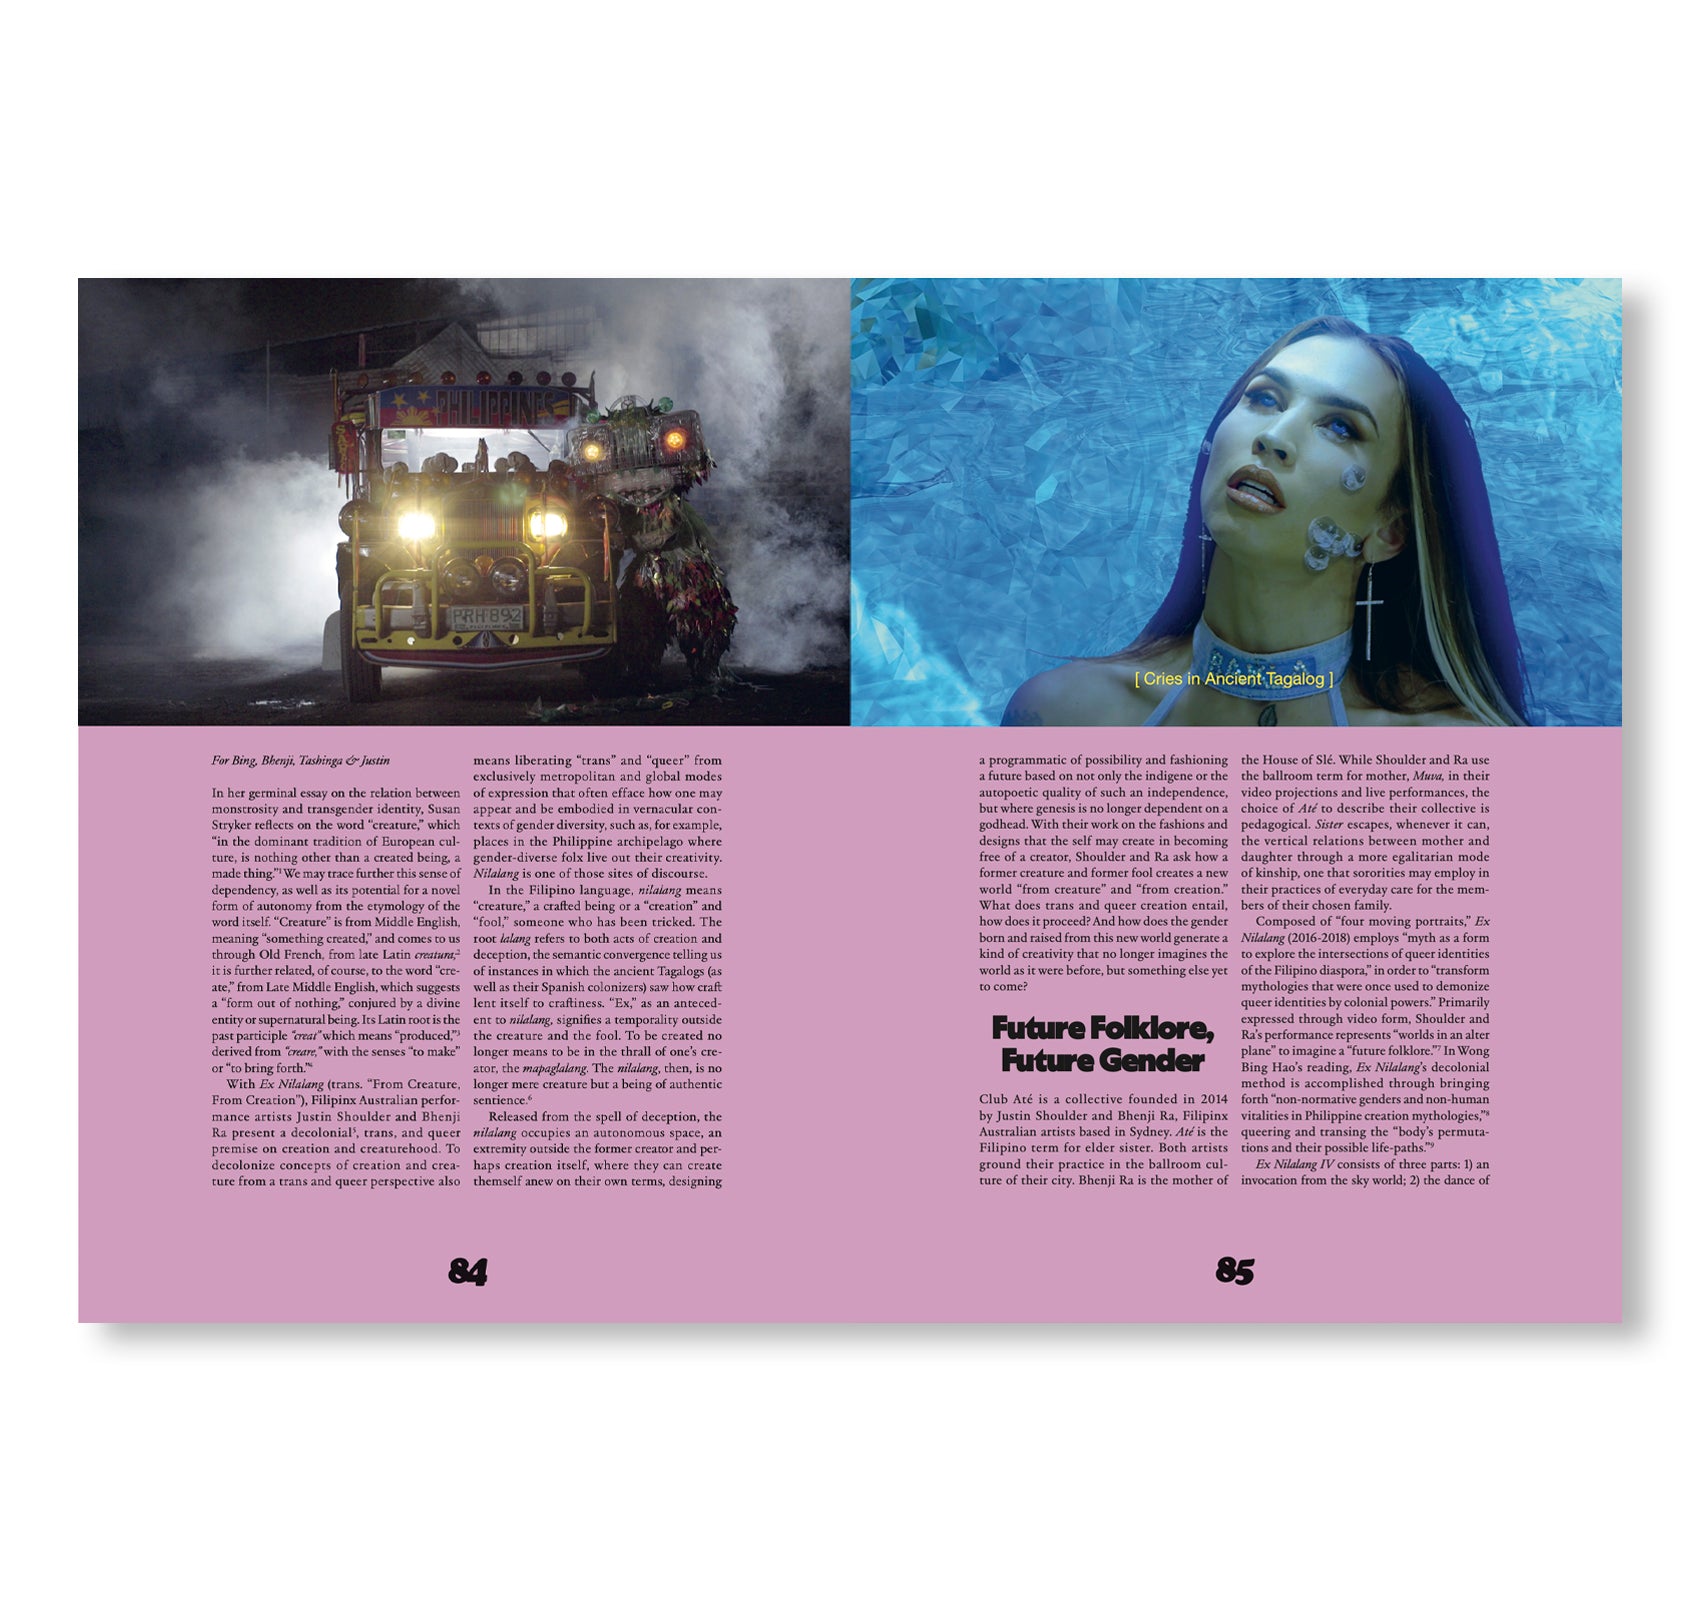 VISCOSE JOURNAL ISSUE 04: TRANS